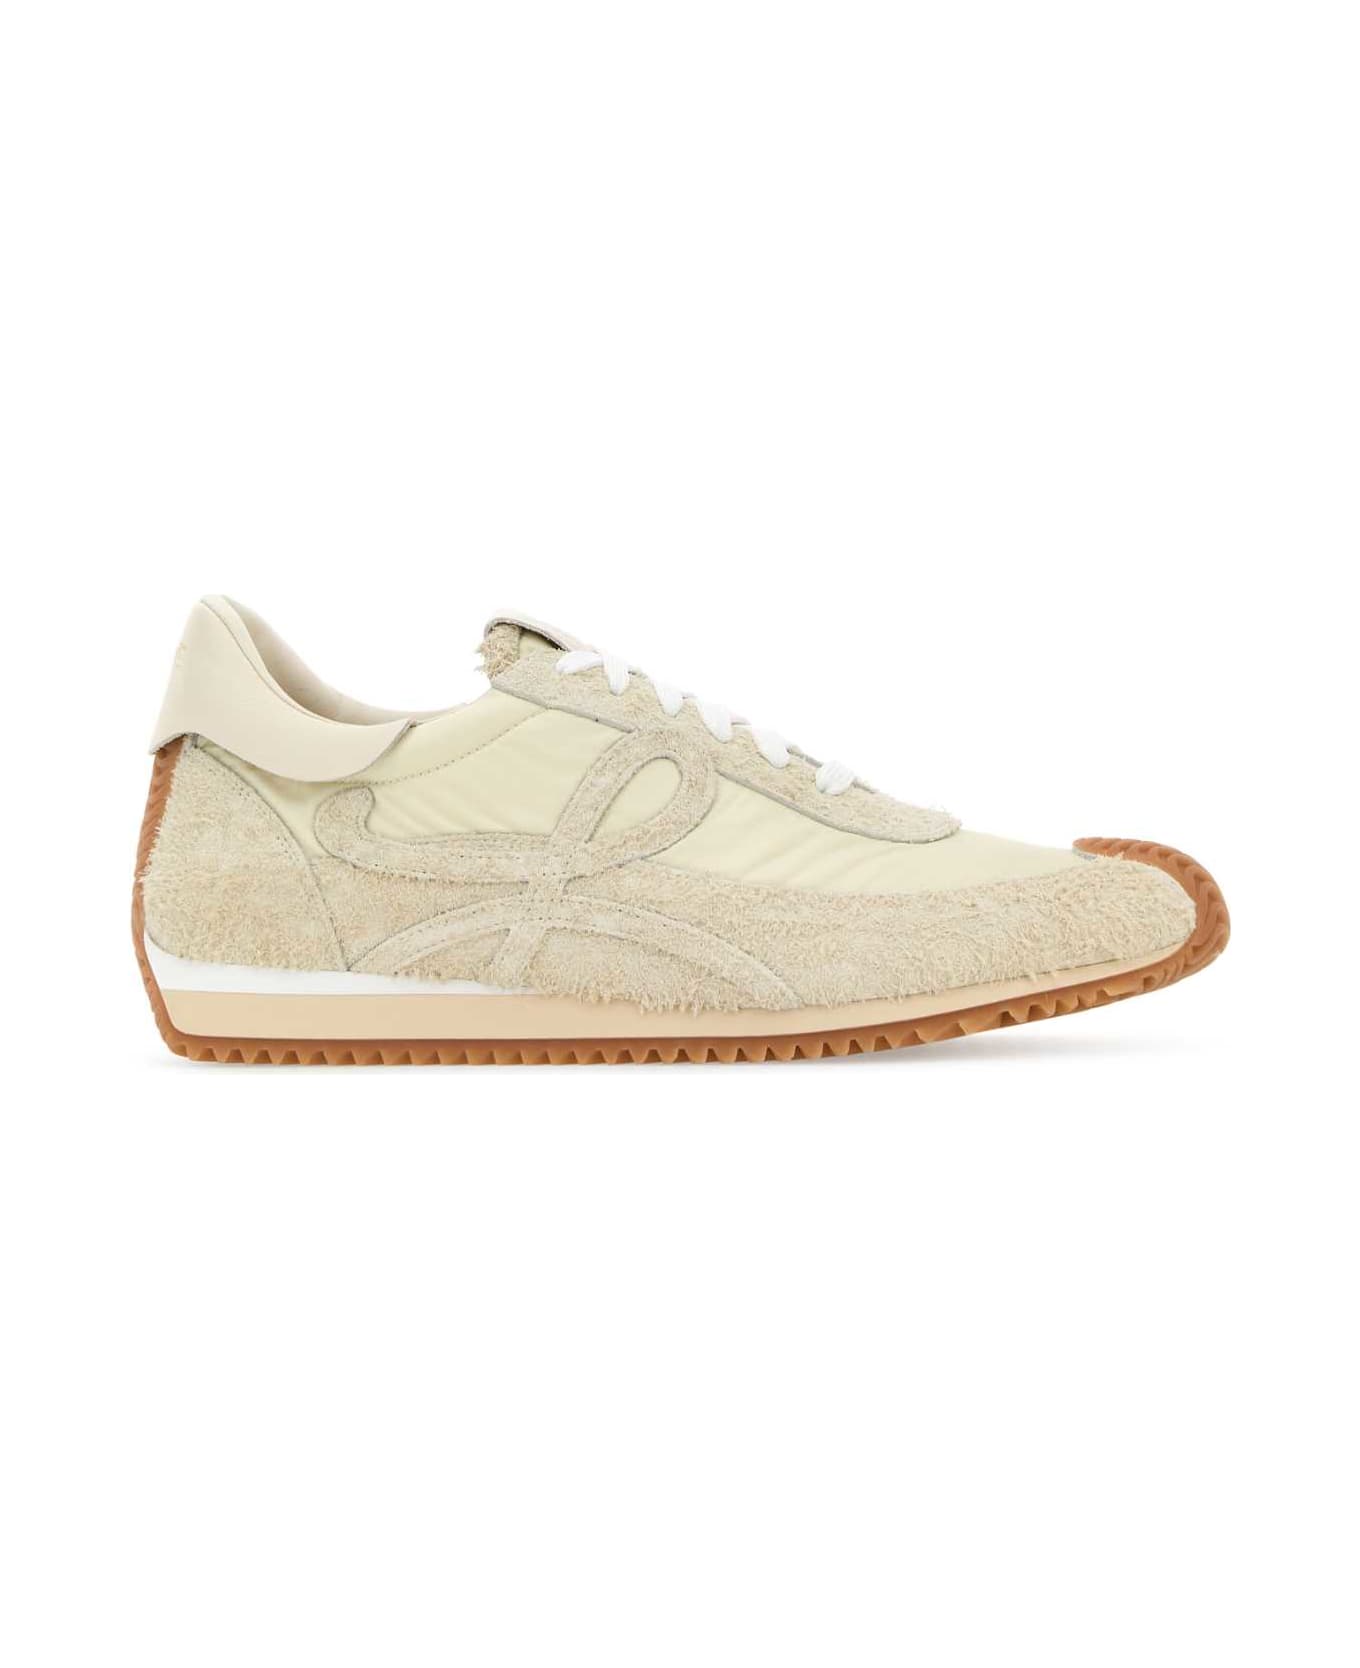 Loewe Ivory Suede And Nylon Flow Runner Sneakers - CANVASSOFTWHITE